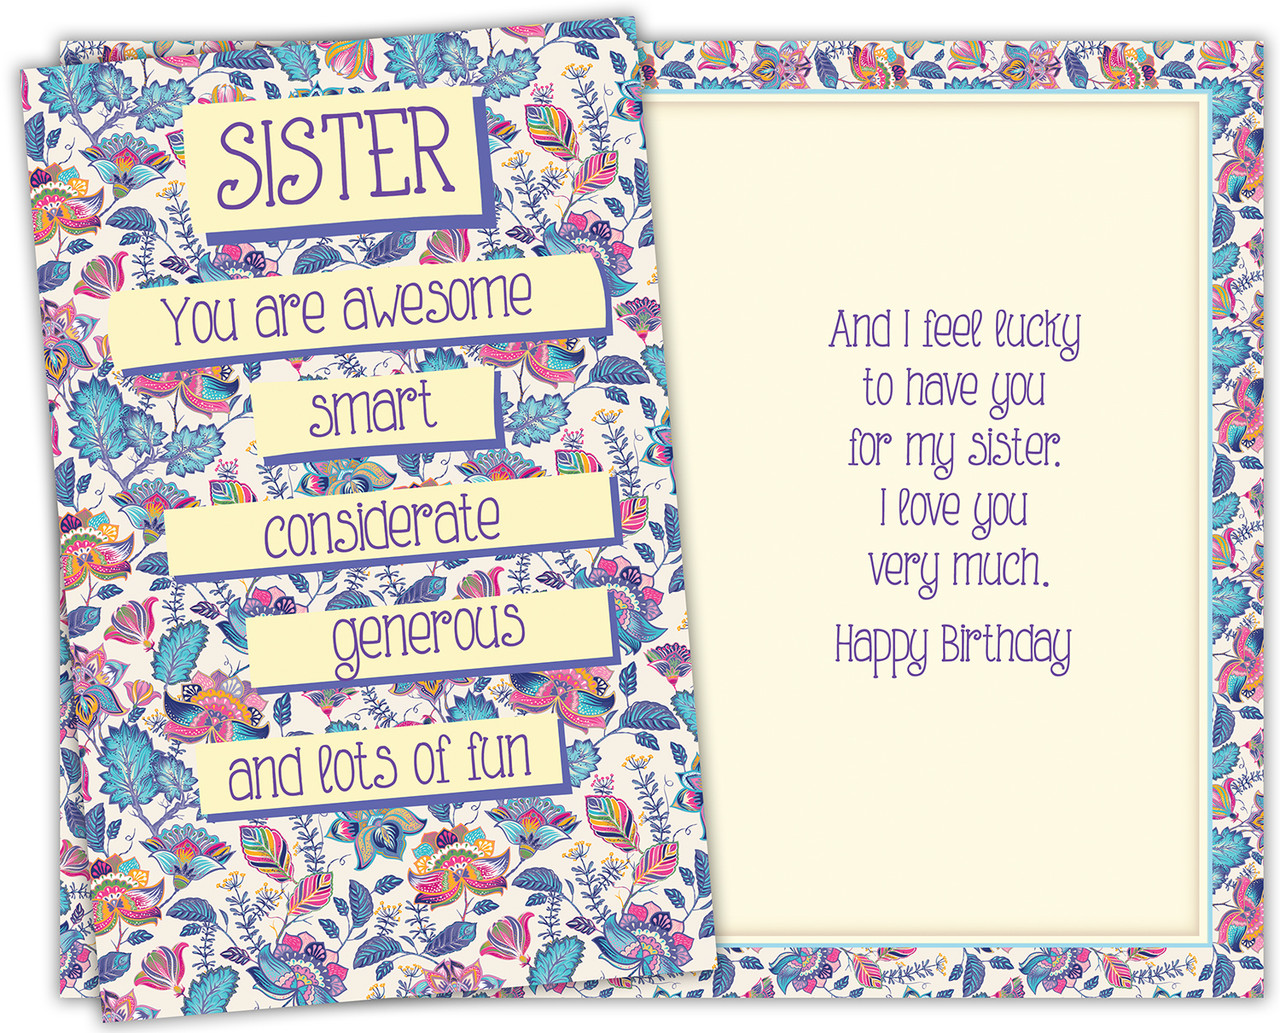 happy birthday to my sister card